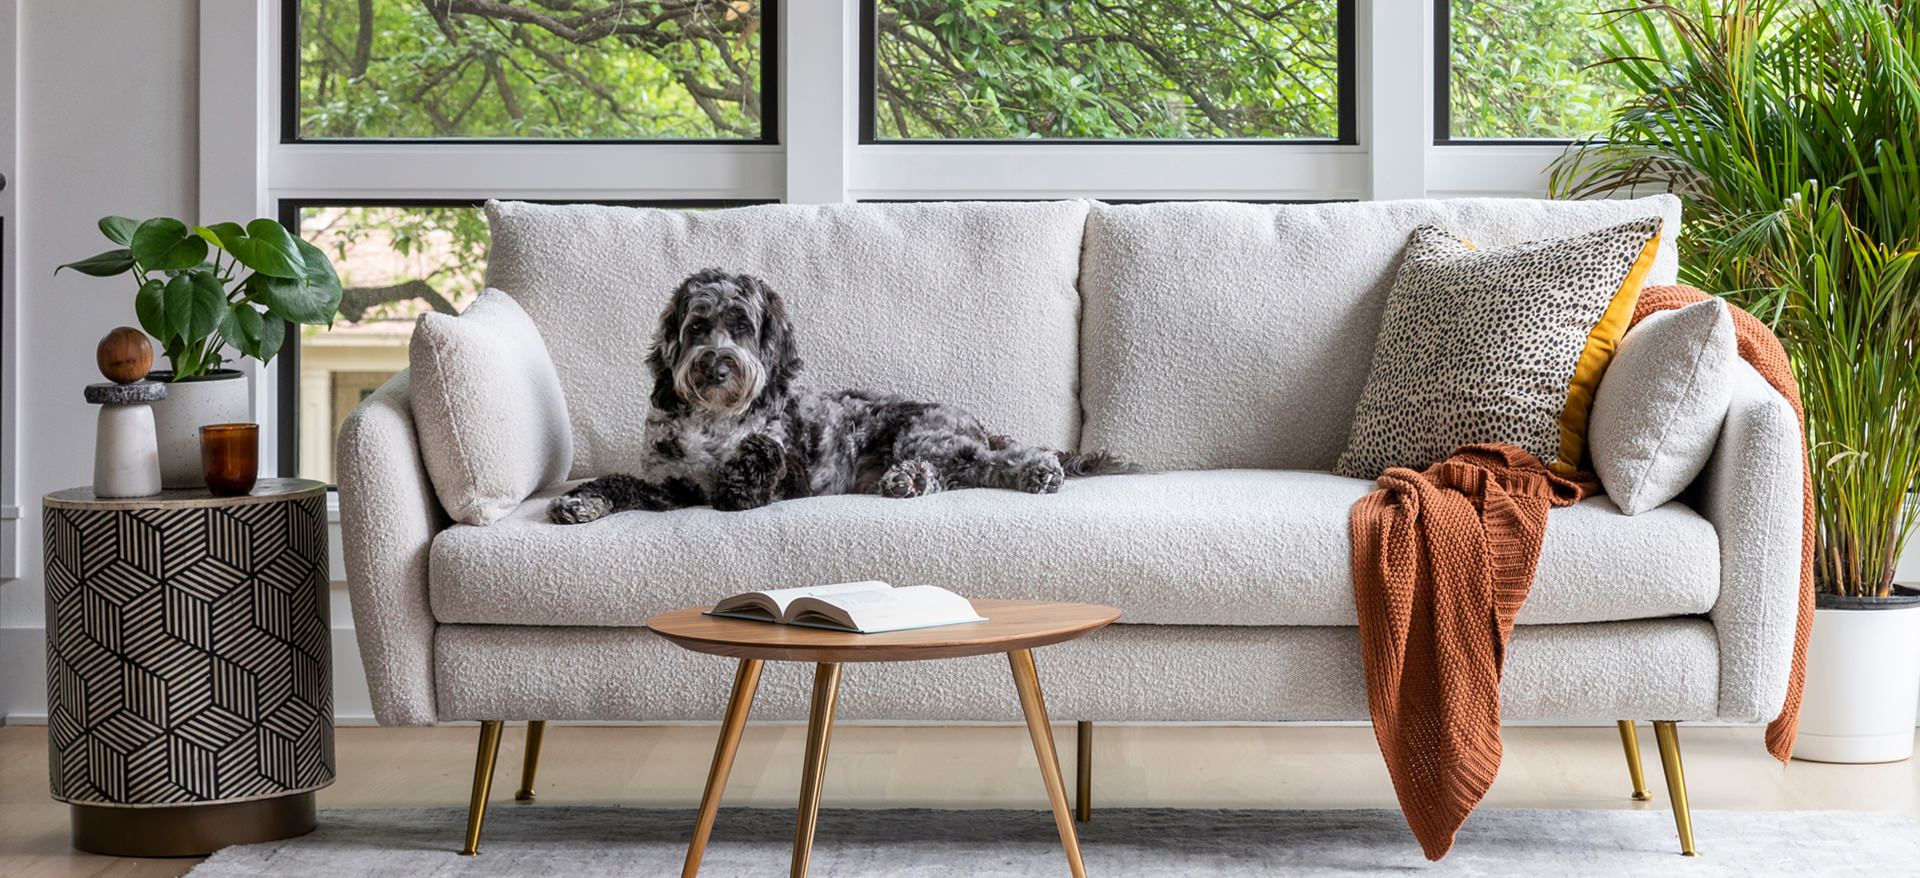 Pet-friendly sofas and armchairs | Albany Park